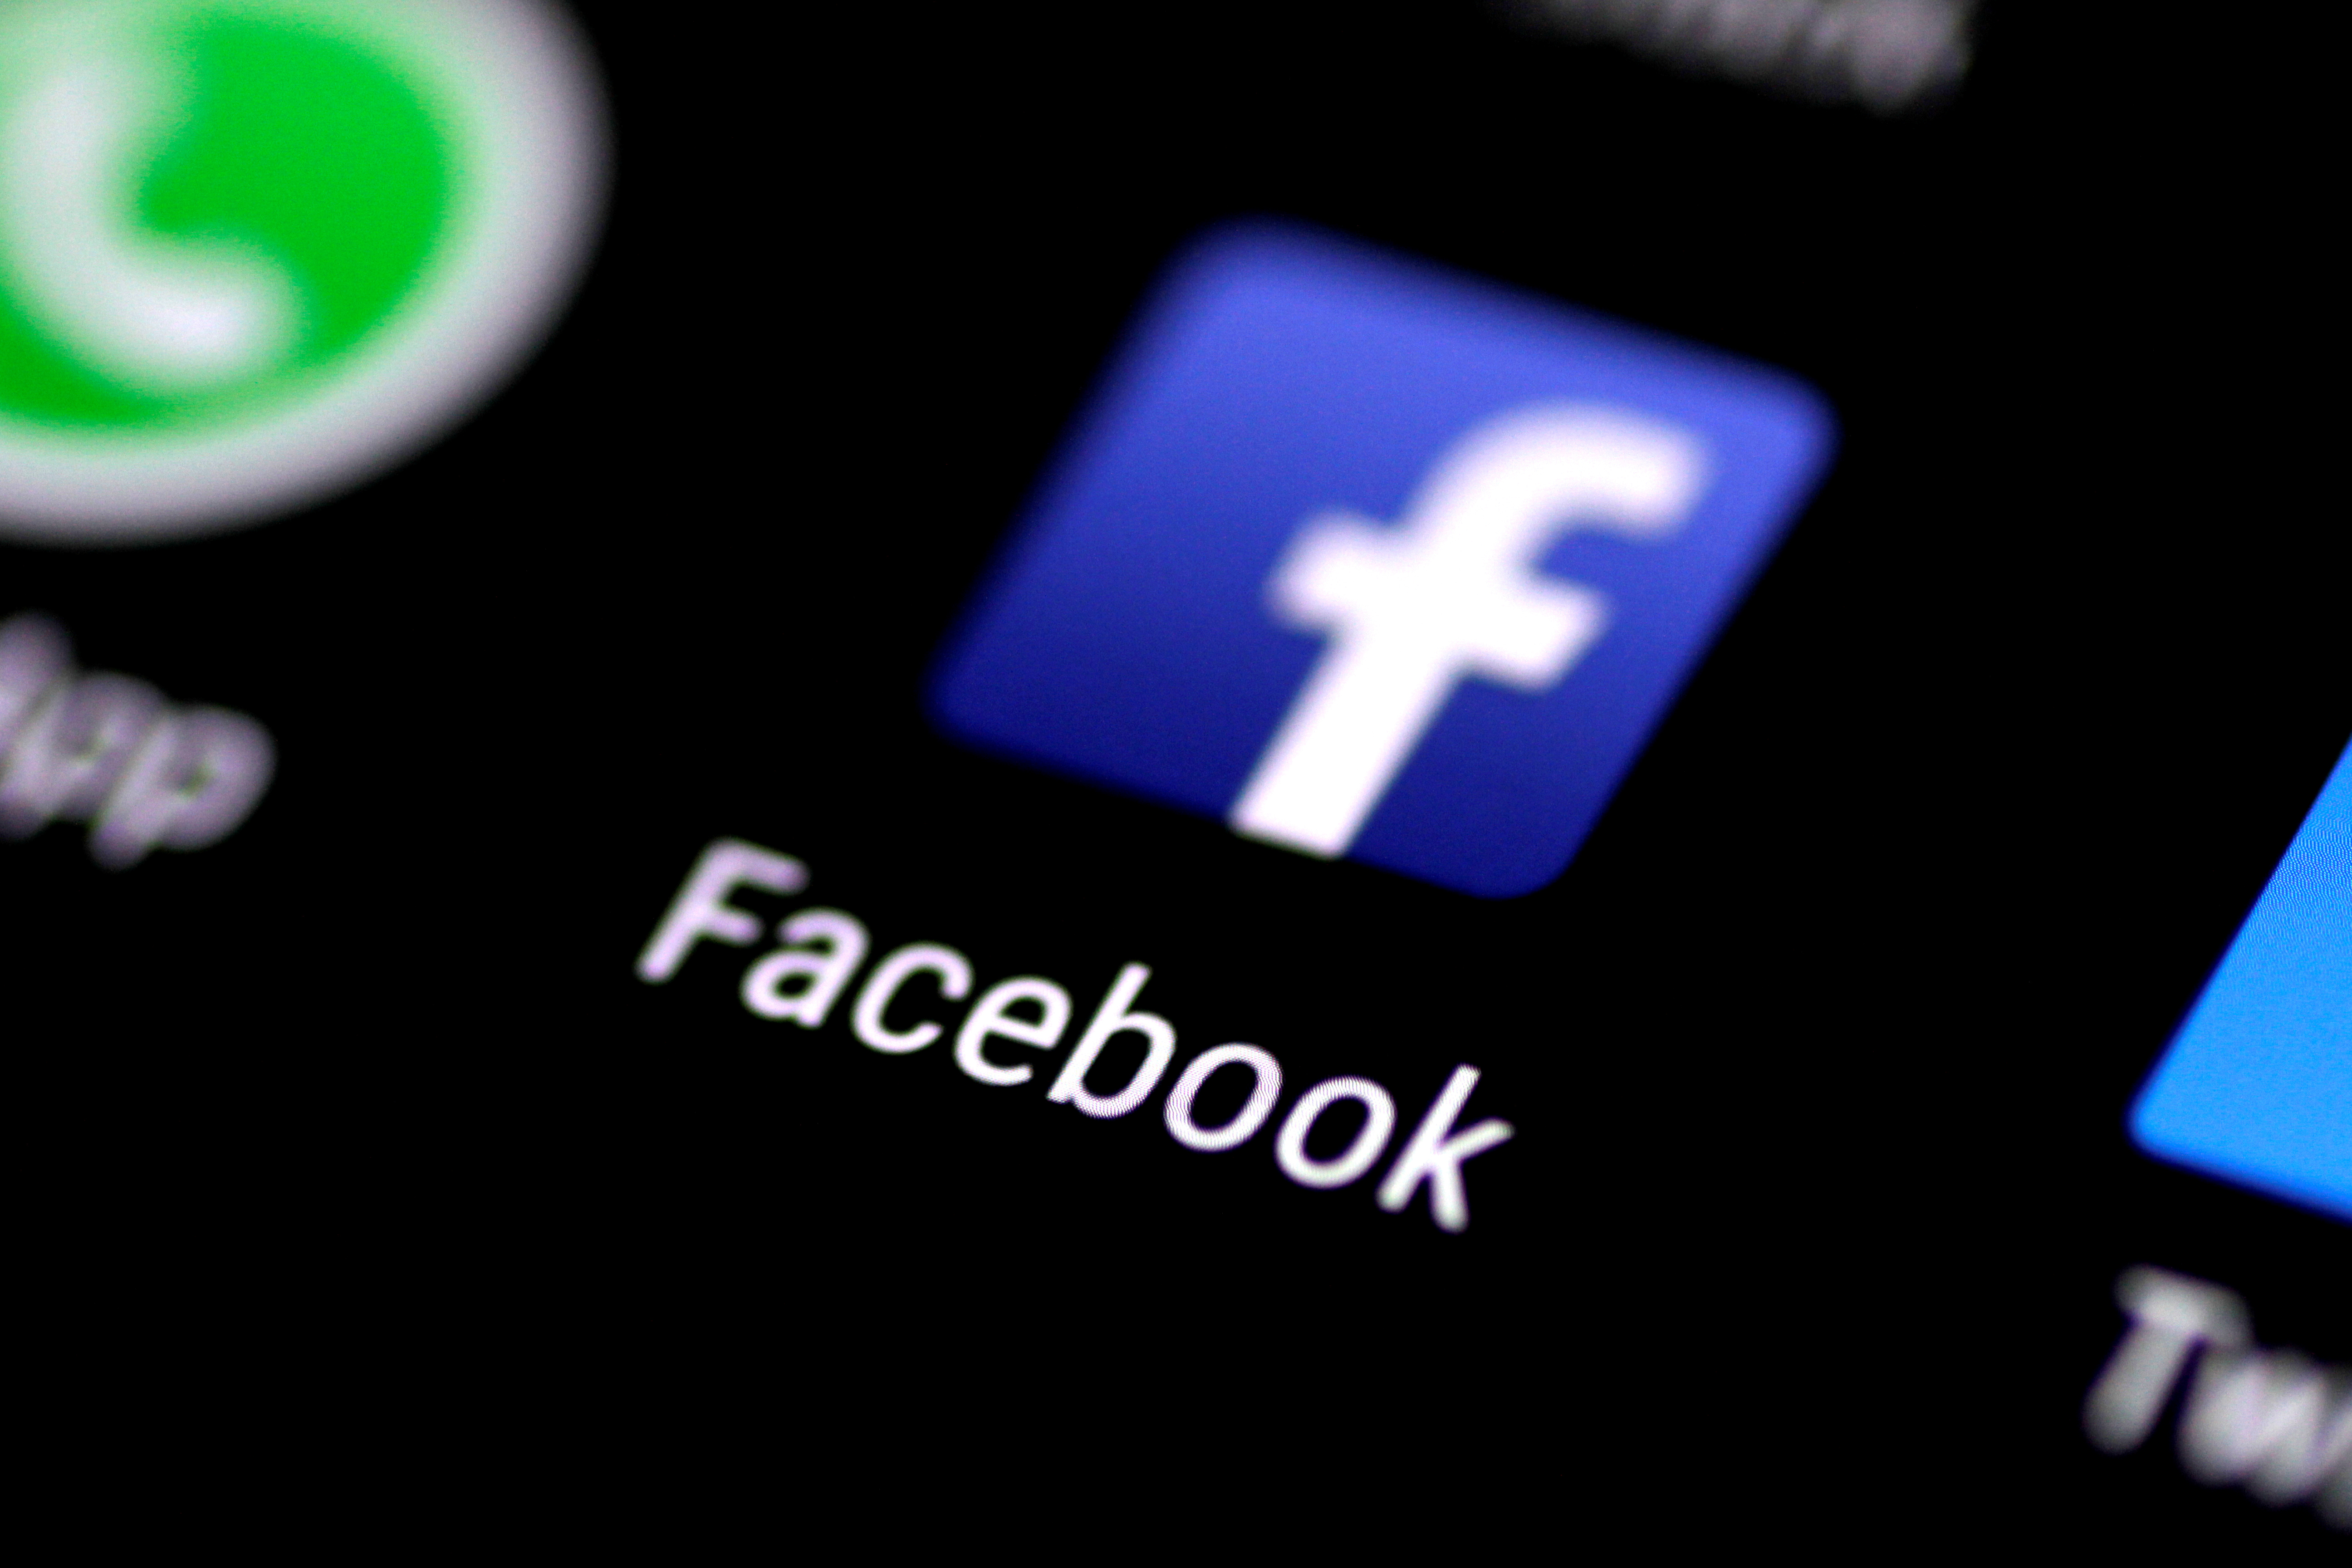 The Facebook application is seen on a phone screen